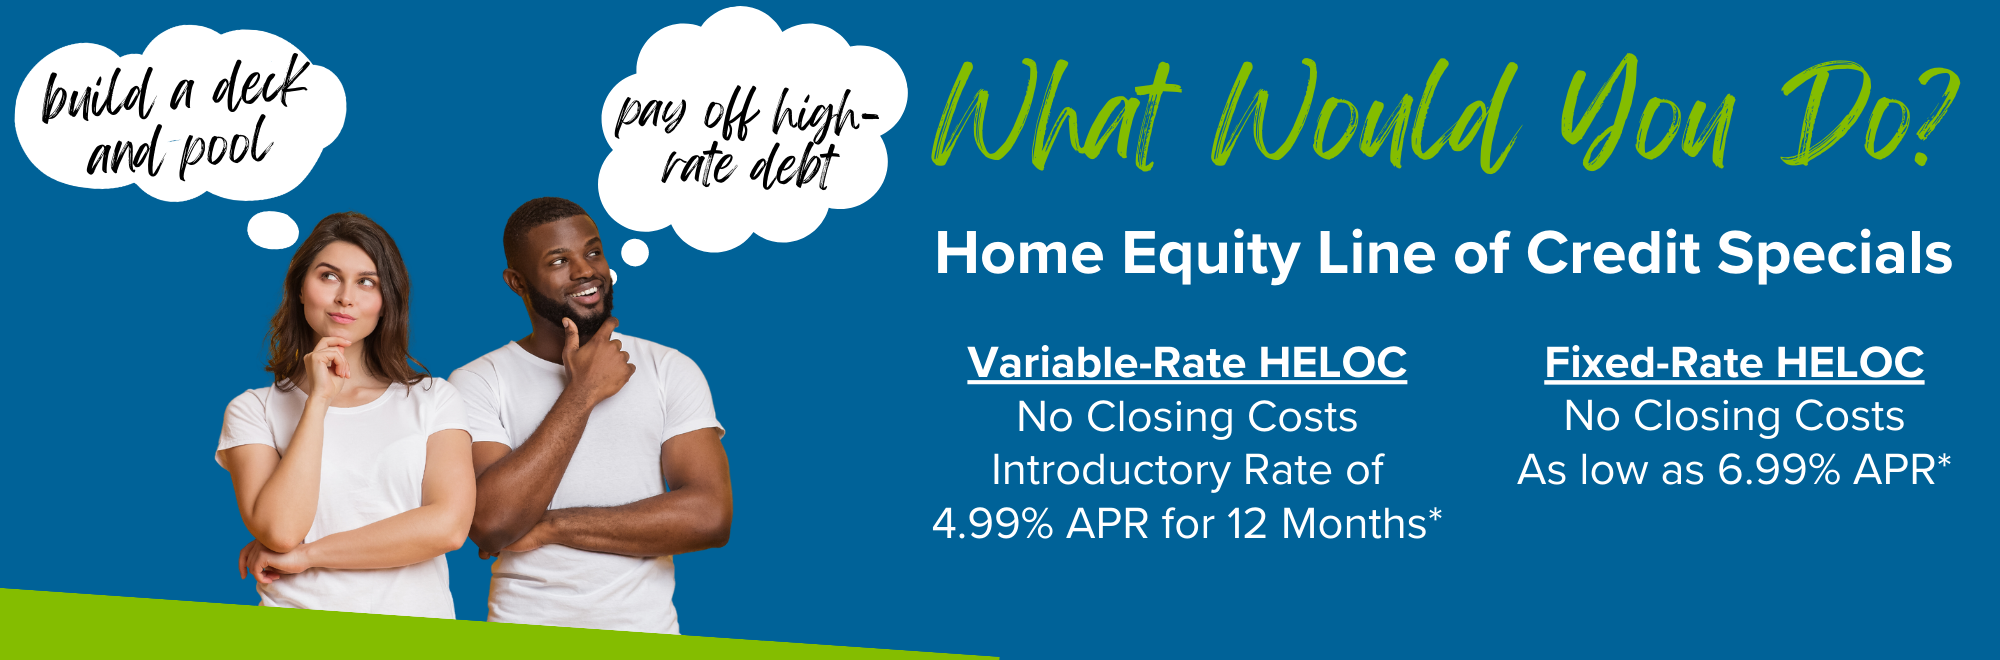 HELOC Specials. Variable rate with no closing costs and 4.99% APR intro rate for 12 months. Fixed rate with no closing costs as low as 6.99% APR.